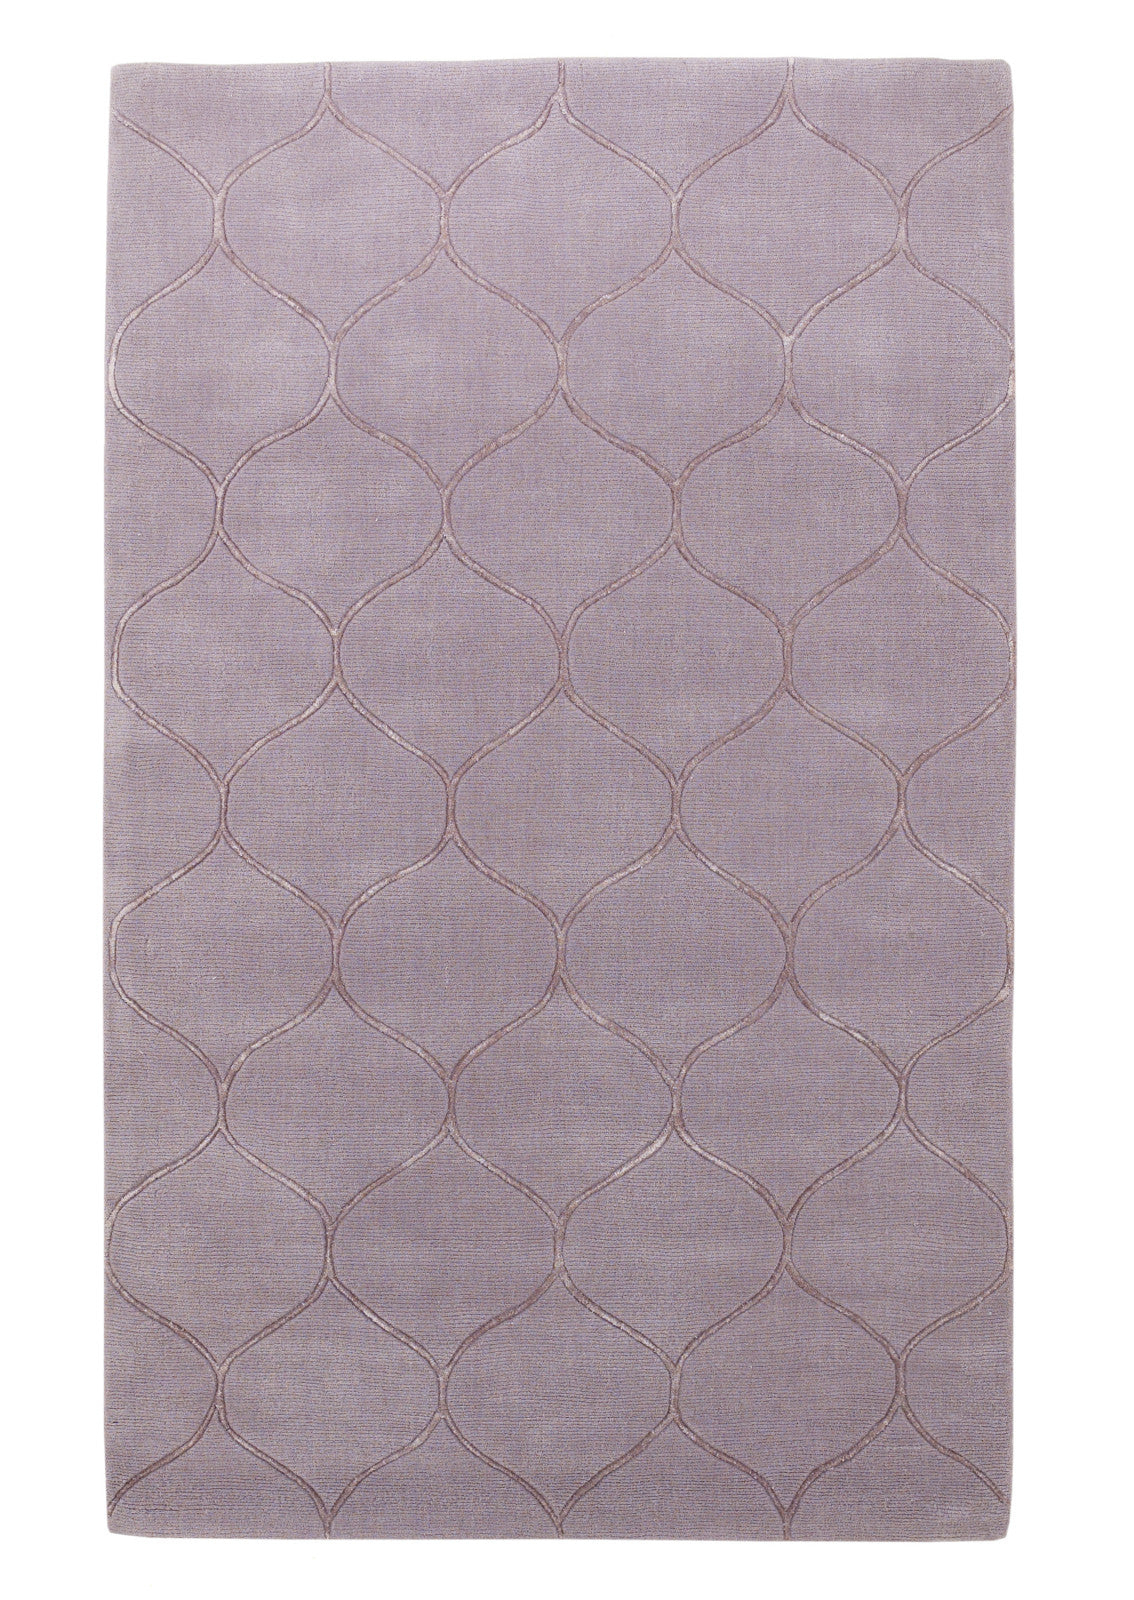 KAS Transitions 3330 Lavender Harmony Hand Tufted Area Rug